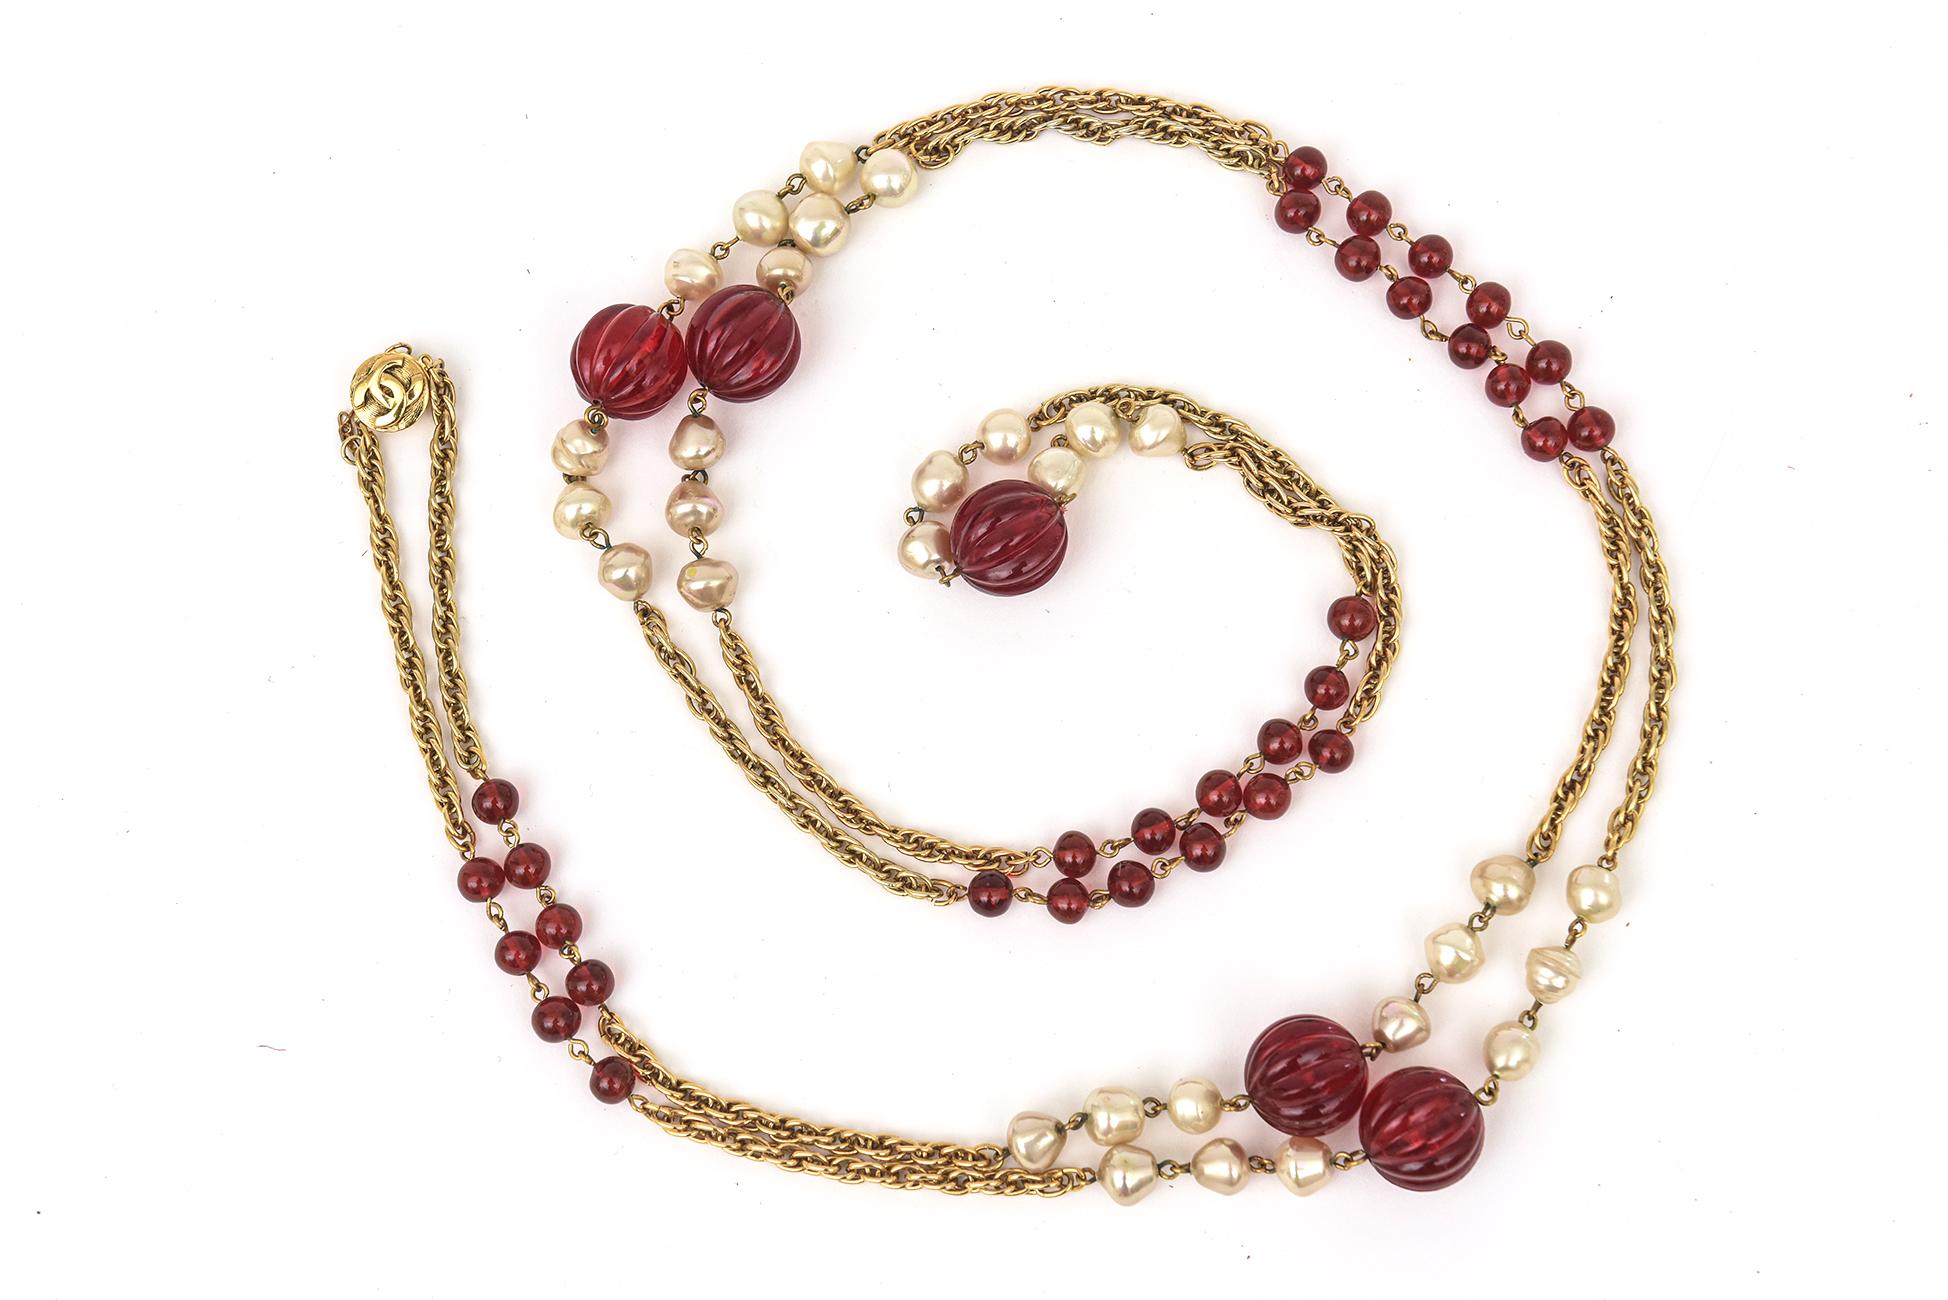 This fabulous long vintage Chanel sautoir necklace has red gripoix glass beads, faux pearls interspersed along the gold metal link chain. The red glass beads are 2 different sizes. It can wrap 2 or 3 times over on your neck or you can stagger it. It